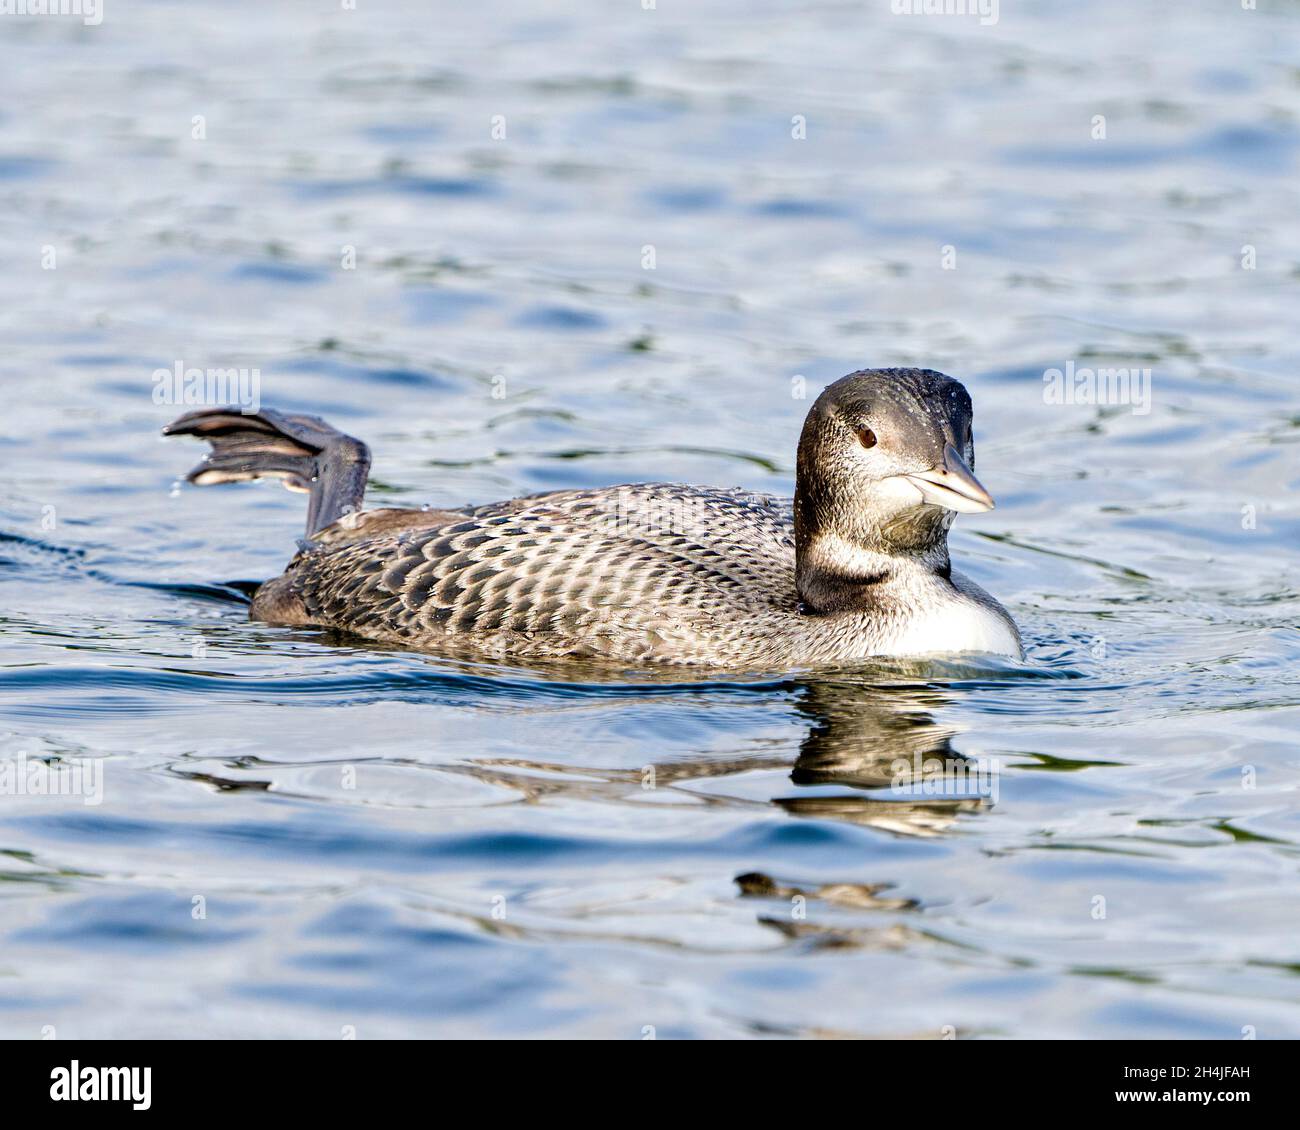 Common Loon immature young bird swimming in its environment and habitat, displaying its growing up stage feather plumage and shaking one foot. Stock Photo